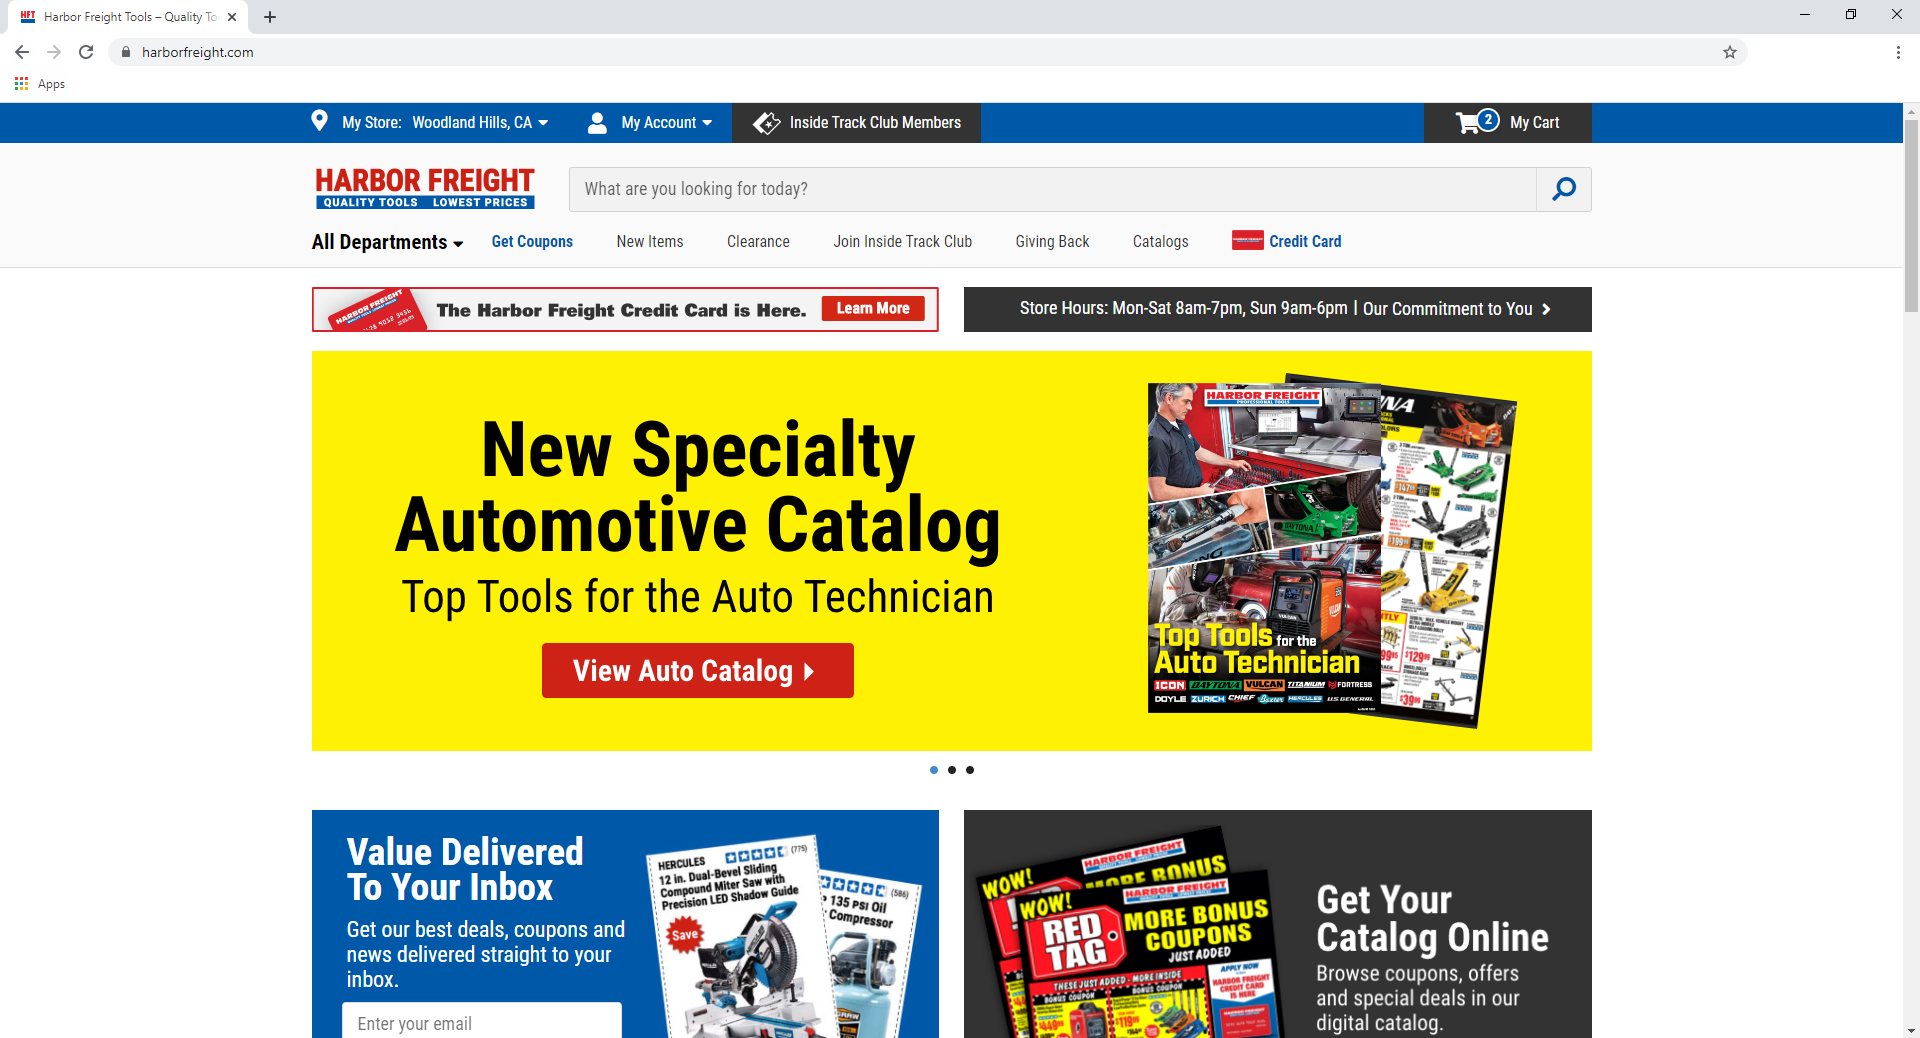 Does Harbor Freight Sell Tools Online? – Harbor Freight Coupons